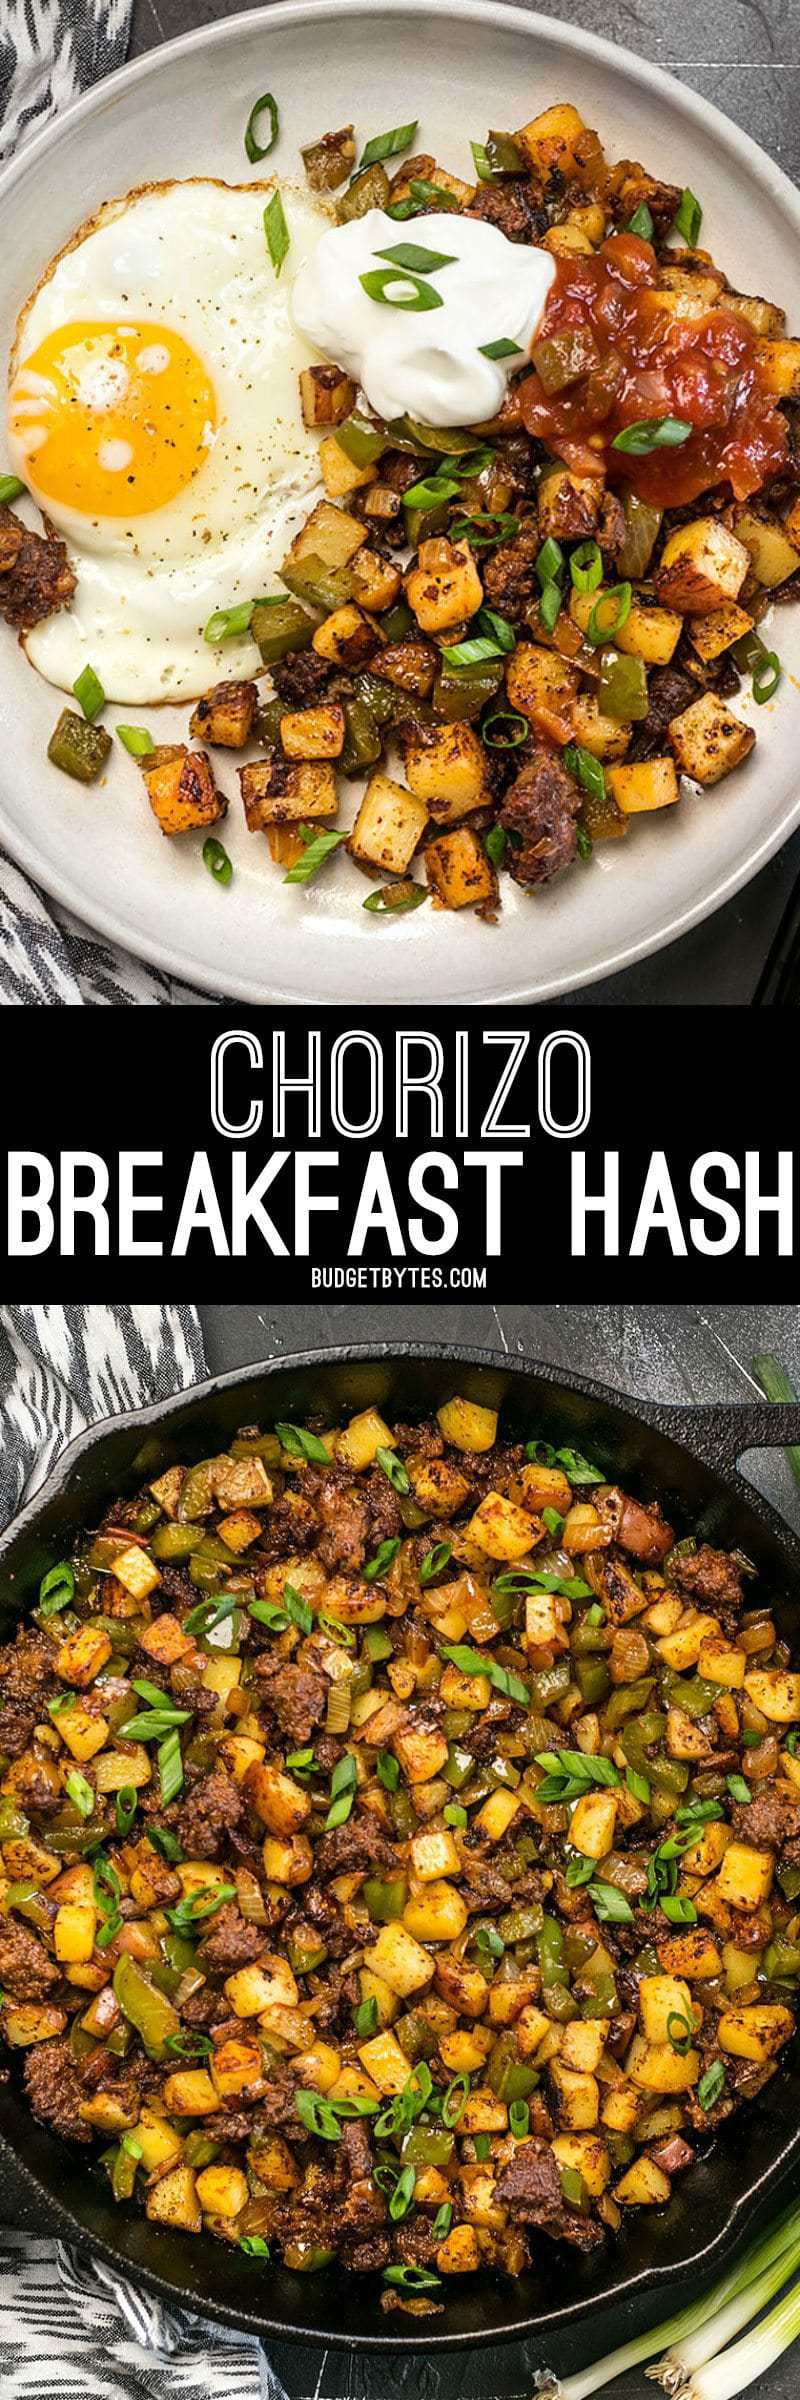 This simple but tasty Chorizo Breakfast Hash is a breakfast classic. Perfect for your lazy weekend brunch, or even "breakfast for dinner". BudgetBytes.com